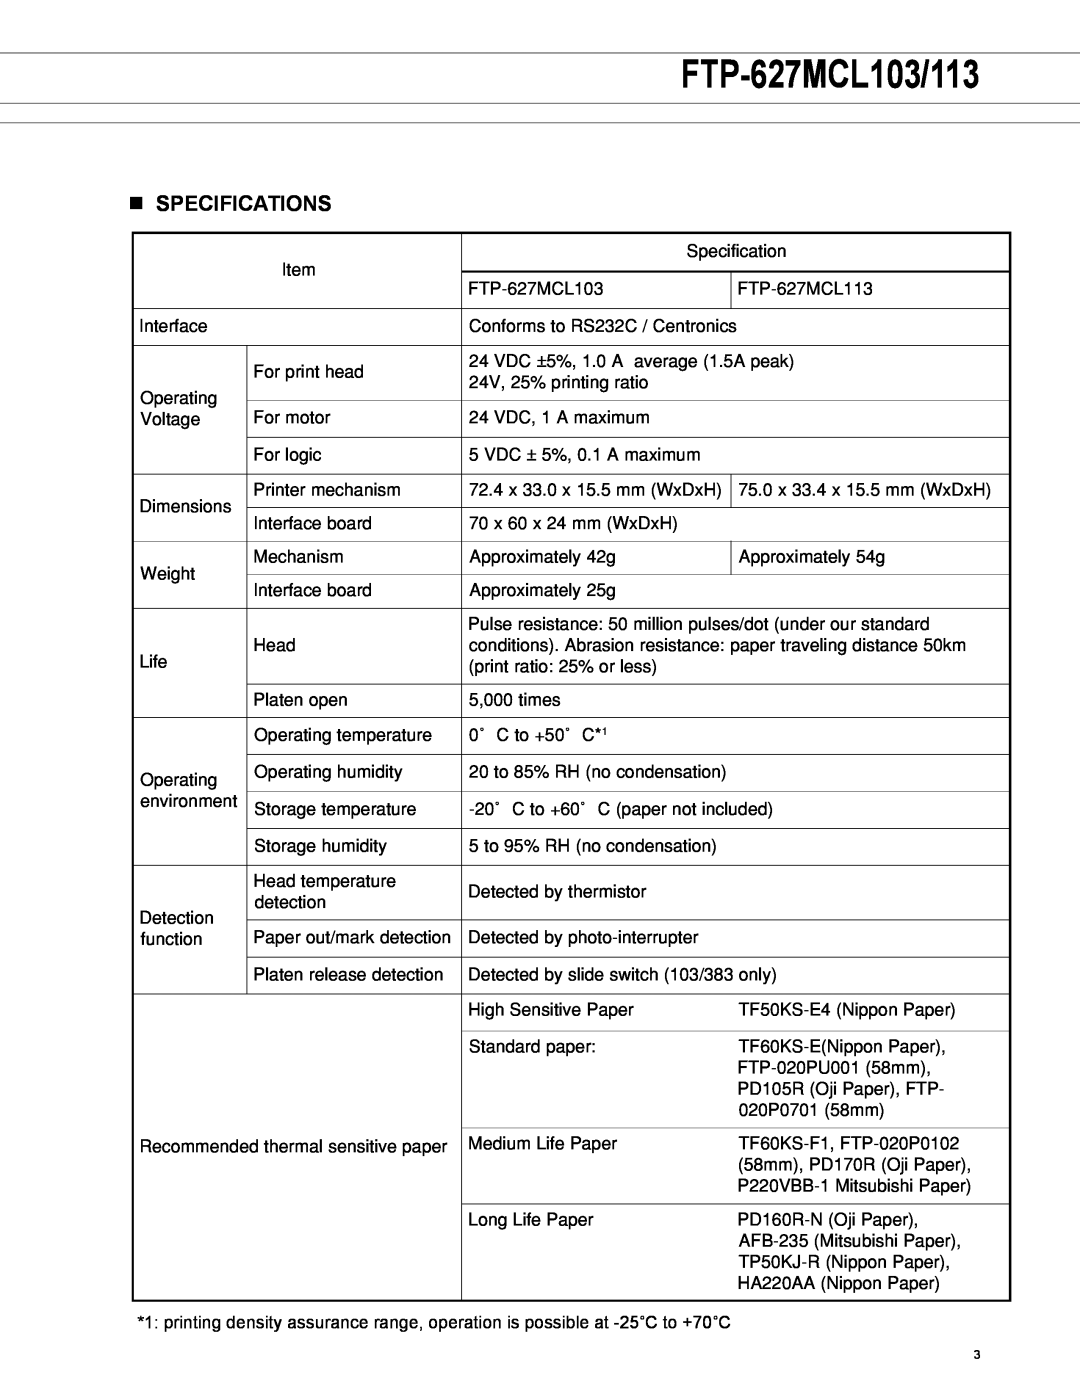 Fujitsu FTP-627MCL113 manual FTP-627MCL103/113, n SPECIFICATIONS 